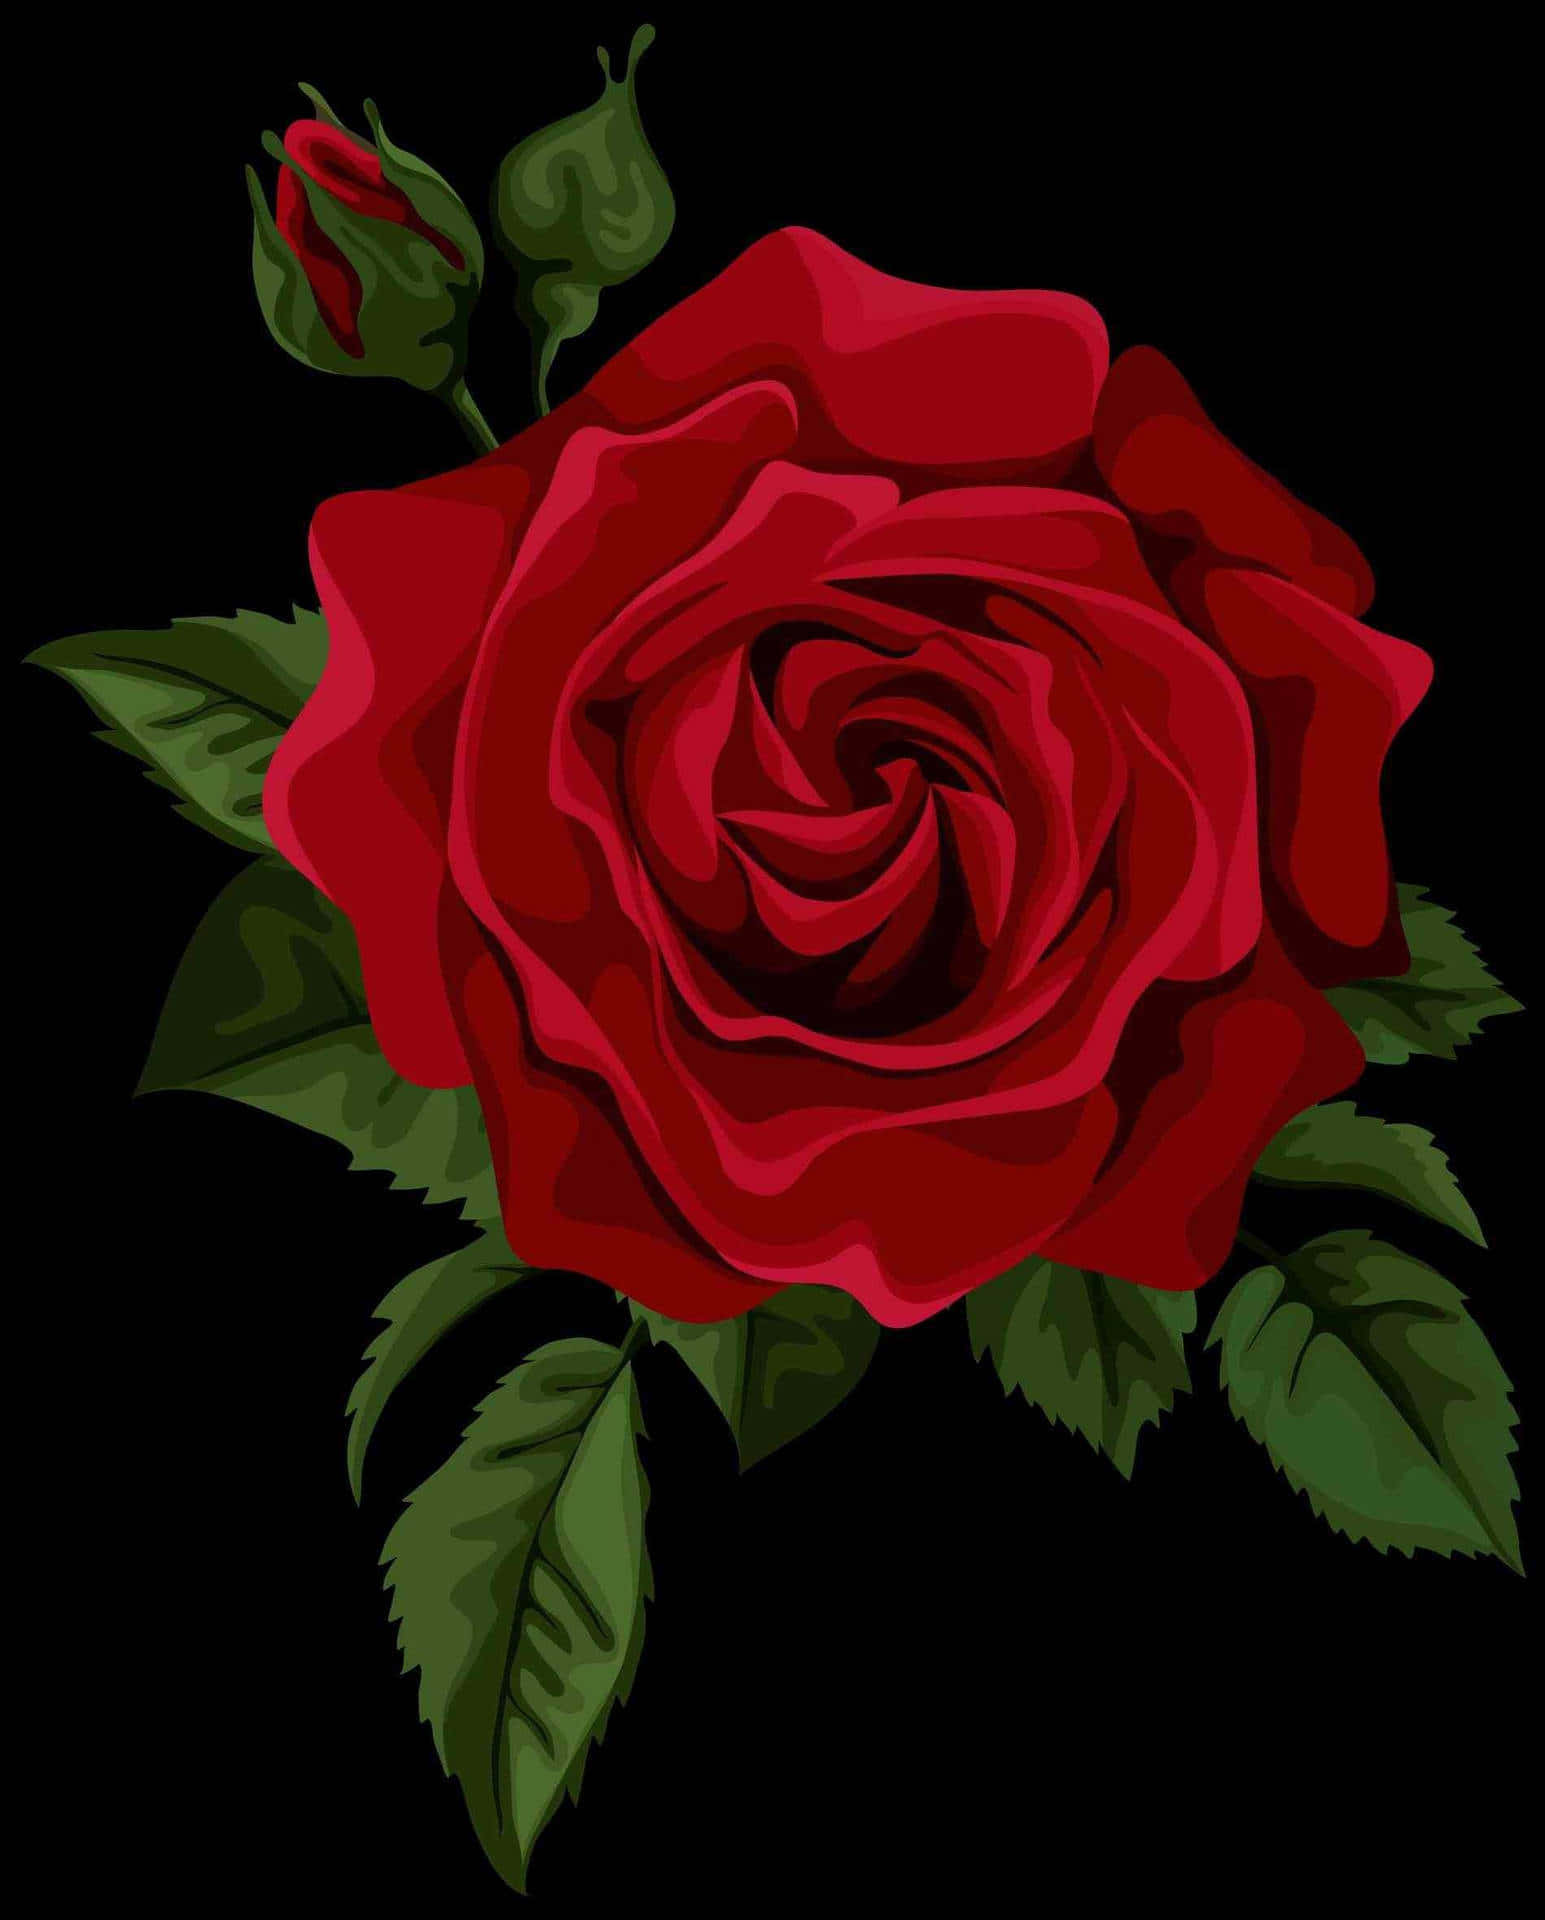 An up-close view of a vibrant red rose Wallpaper